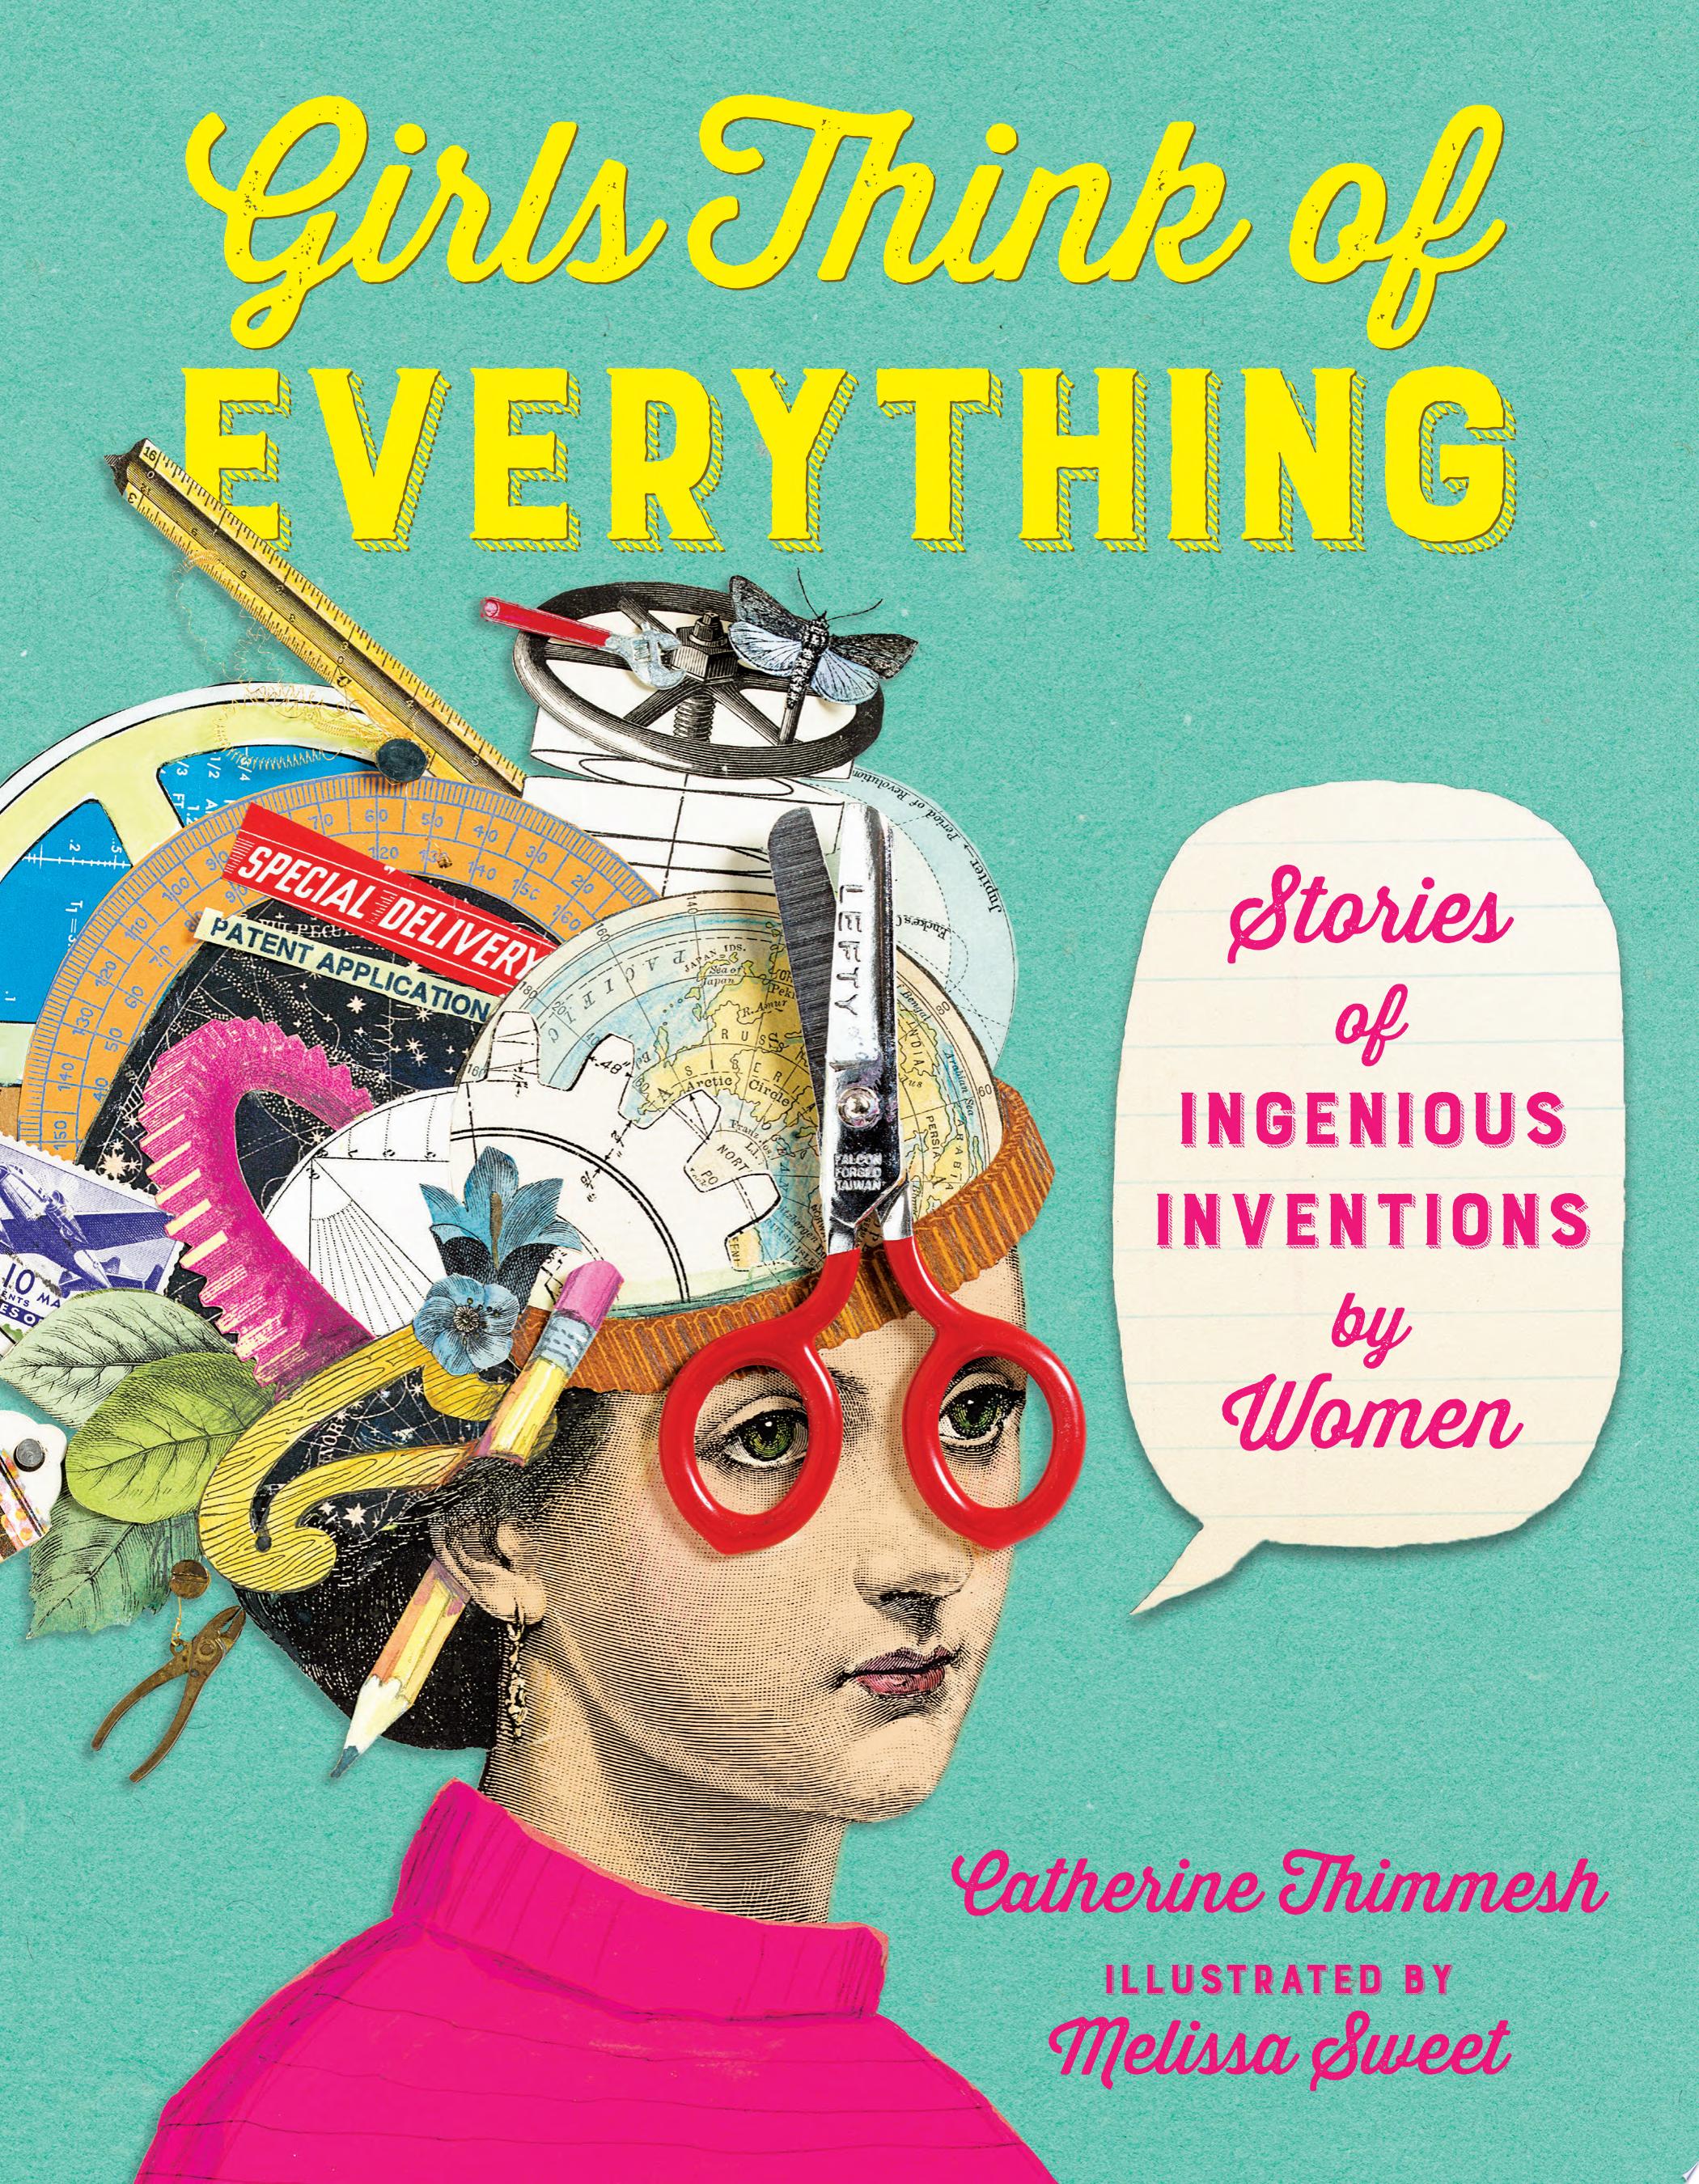 Image for "Girls Think of Everything"